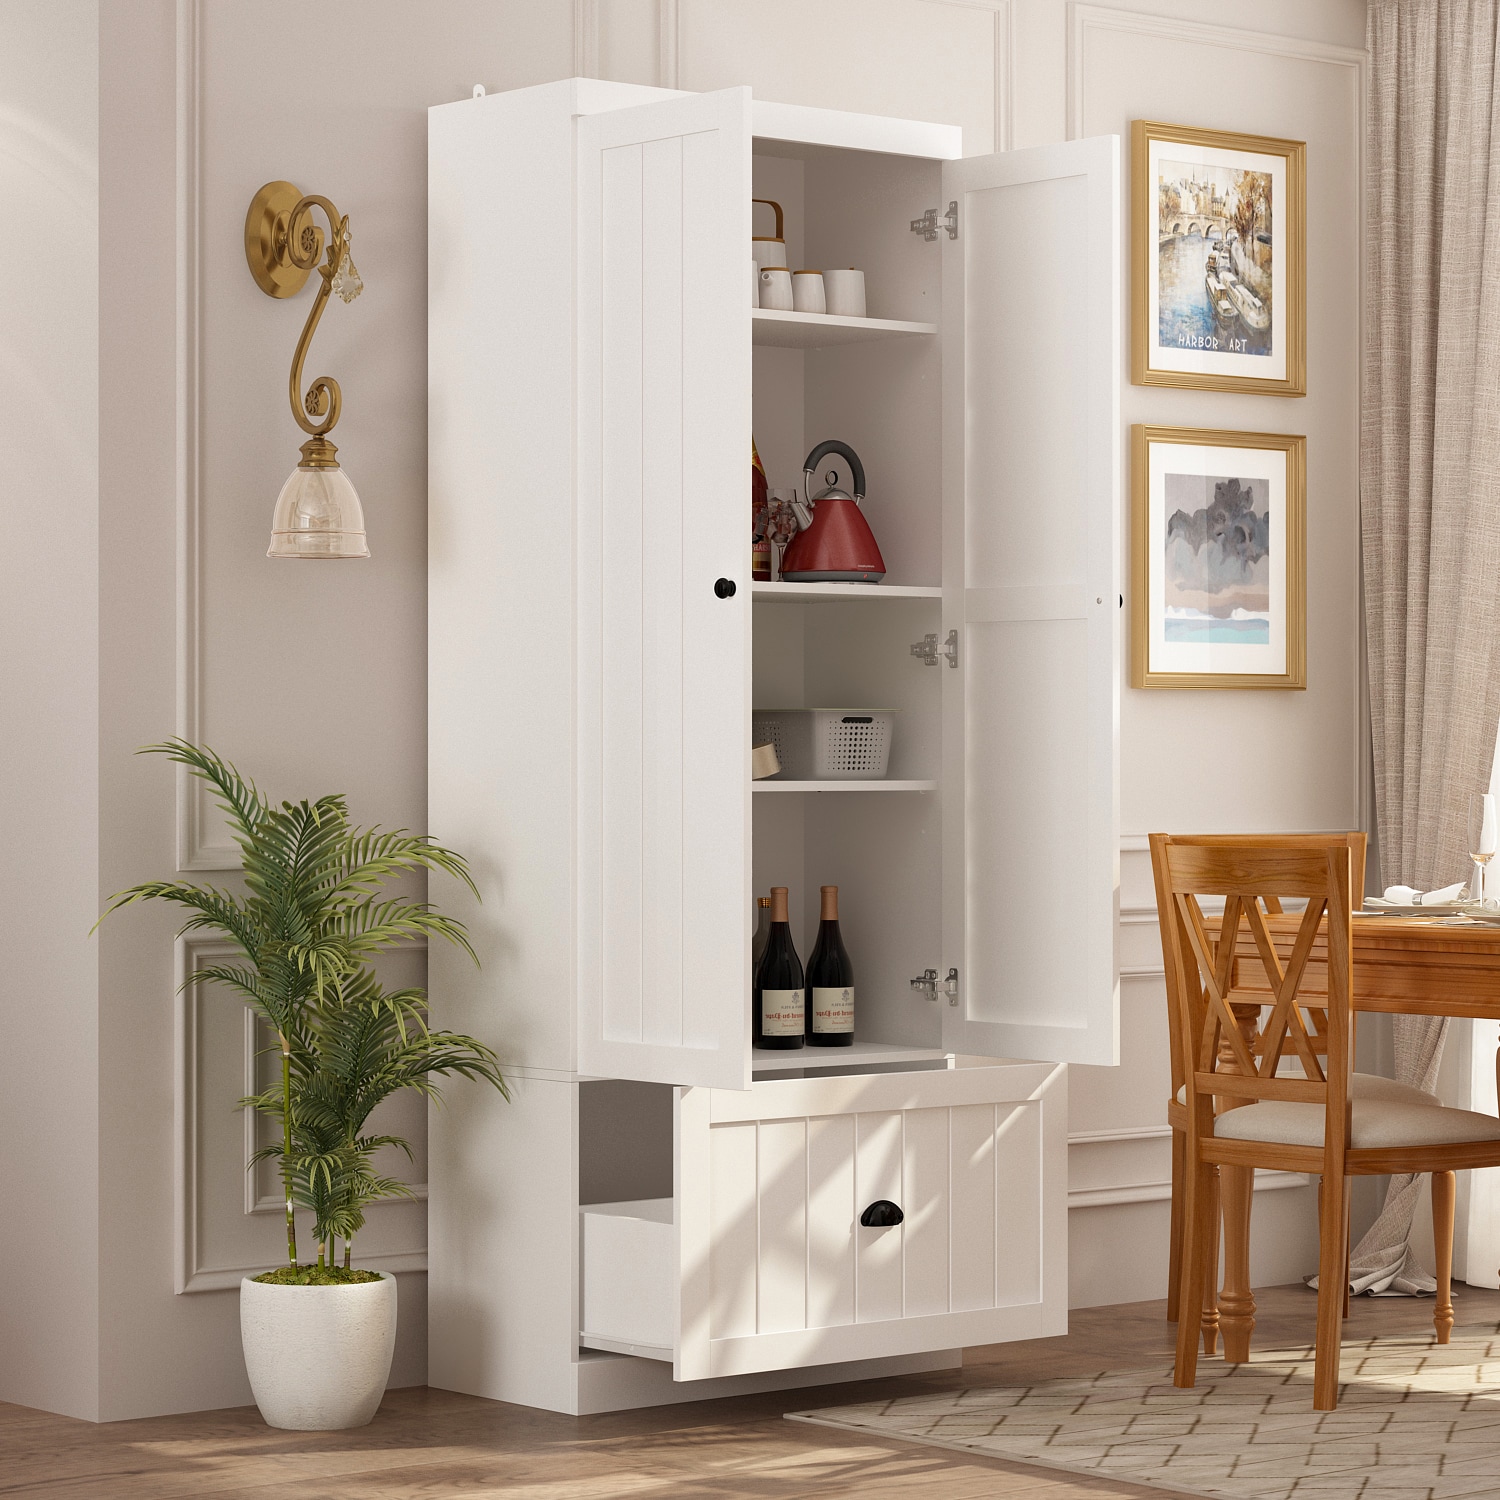 70.9'' Off-White Freestanding Pantry Tall Cabinet Storage Hutch